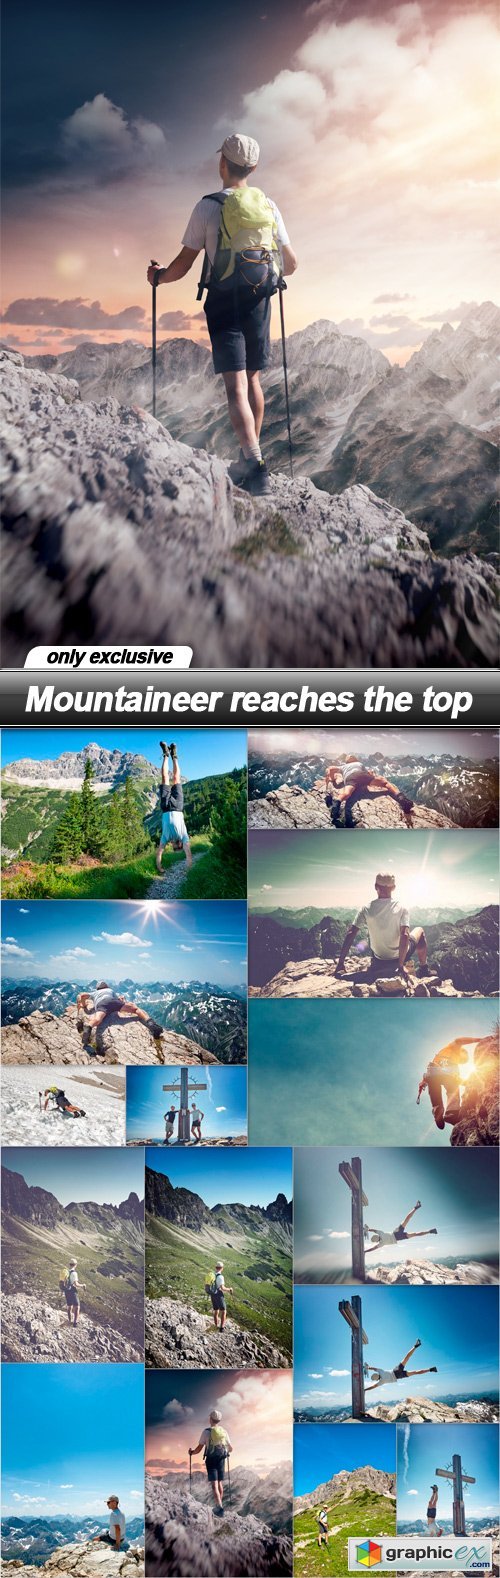 Mountaineer reaches the top - 15 UHQ JPEG